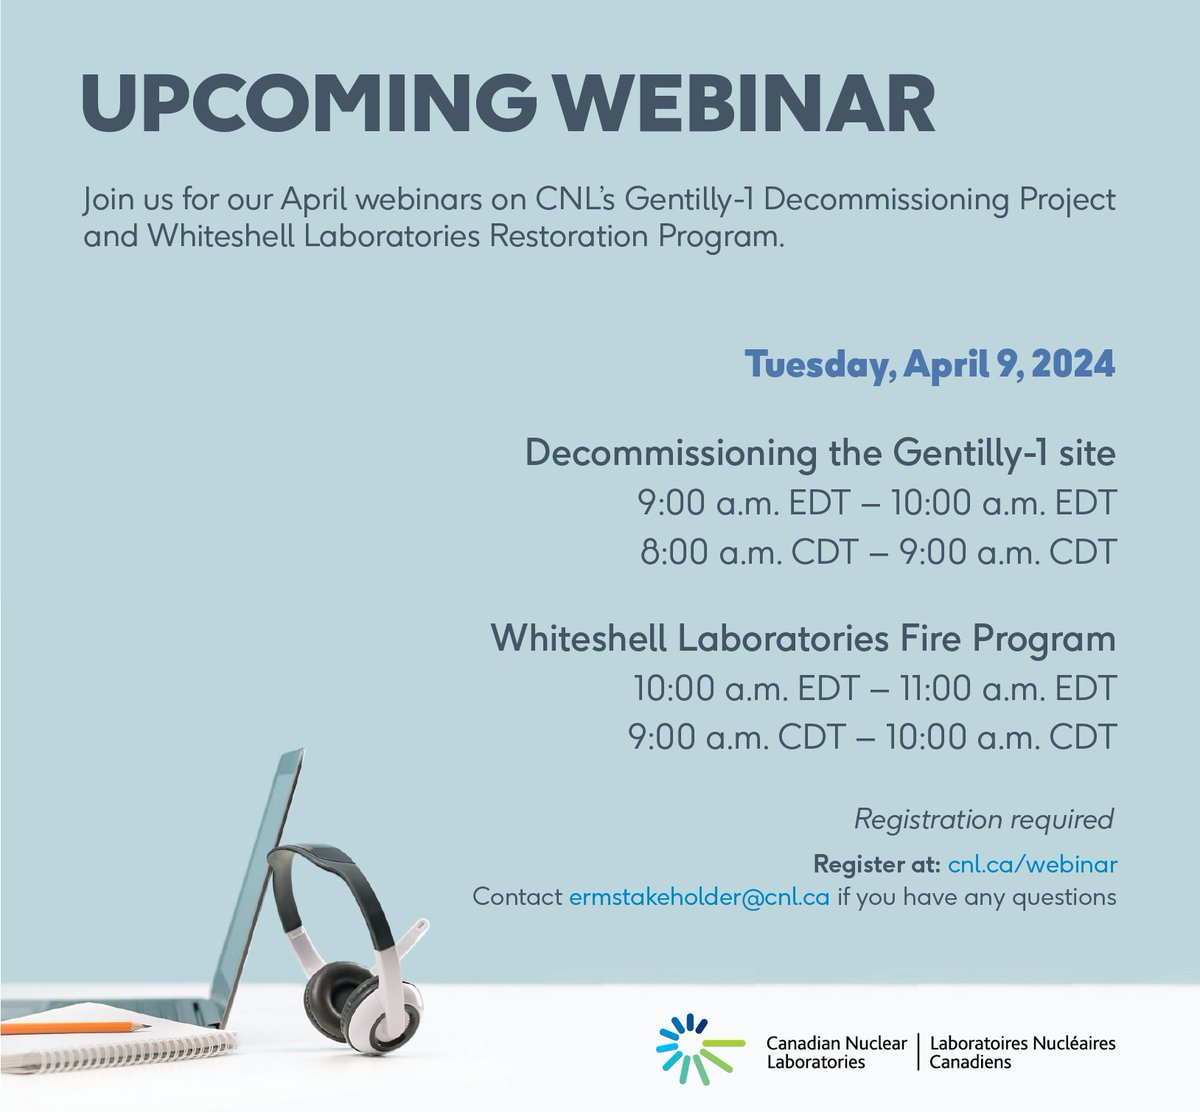 Webinar alert 📢 cnl.ca/webinar Contact ermstakeholder@cnl.ca if you have any questions.